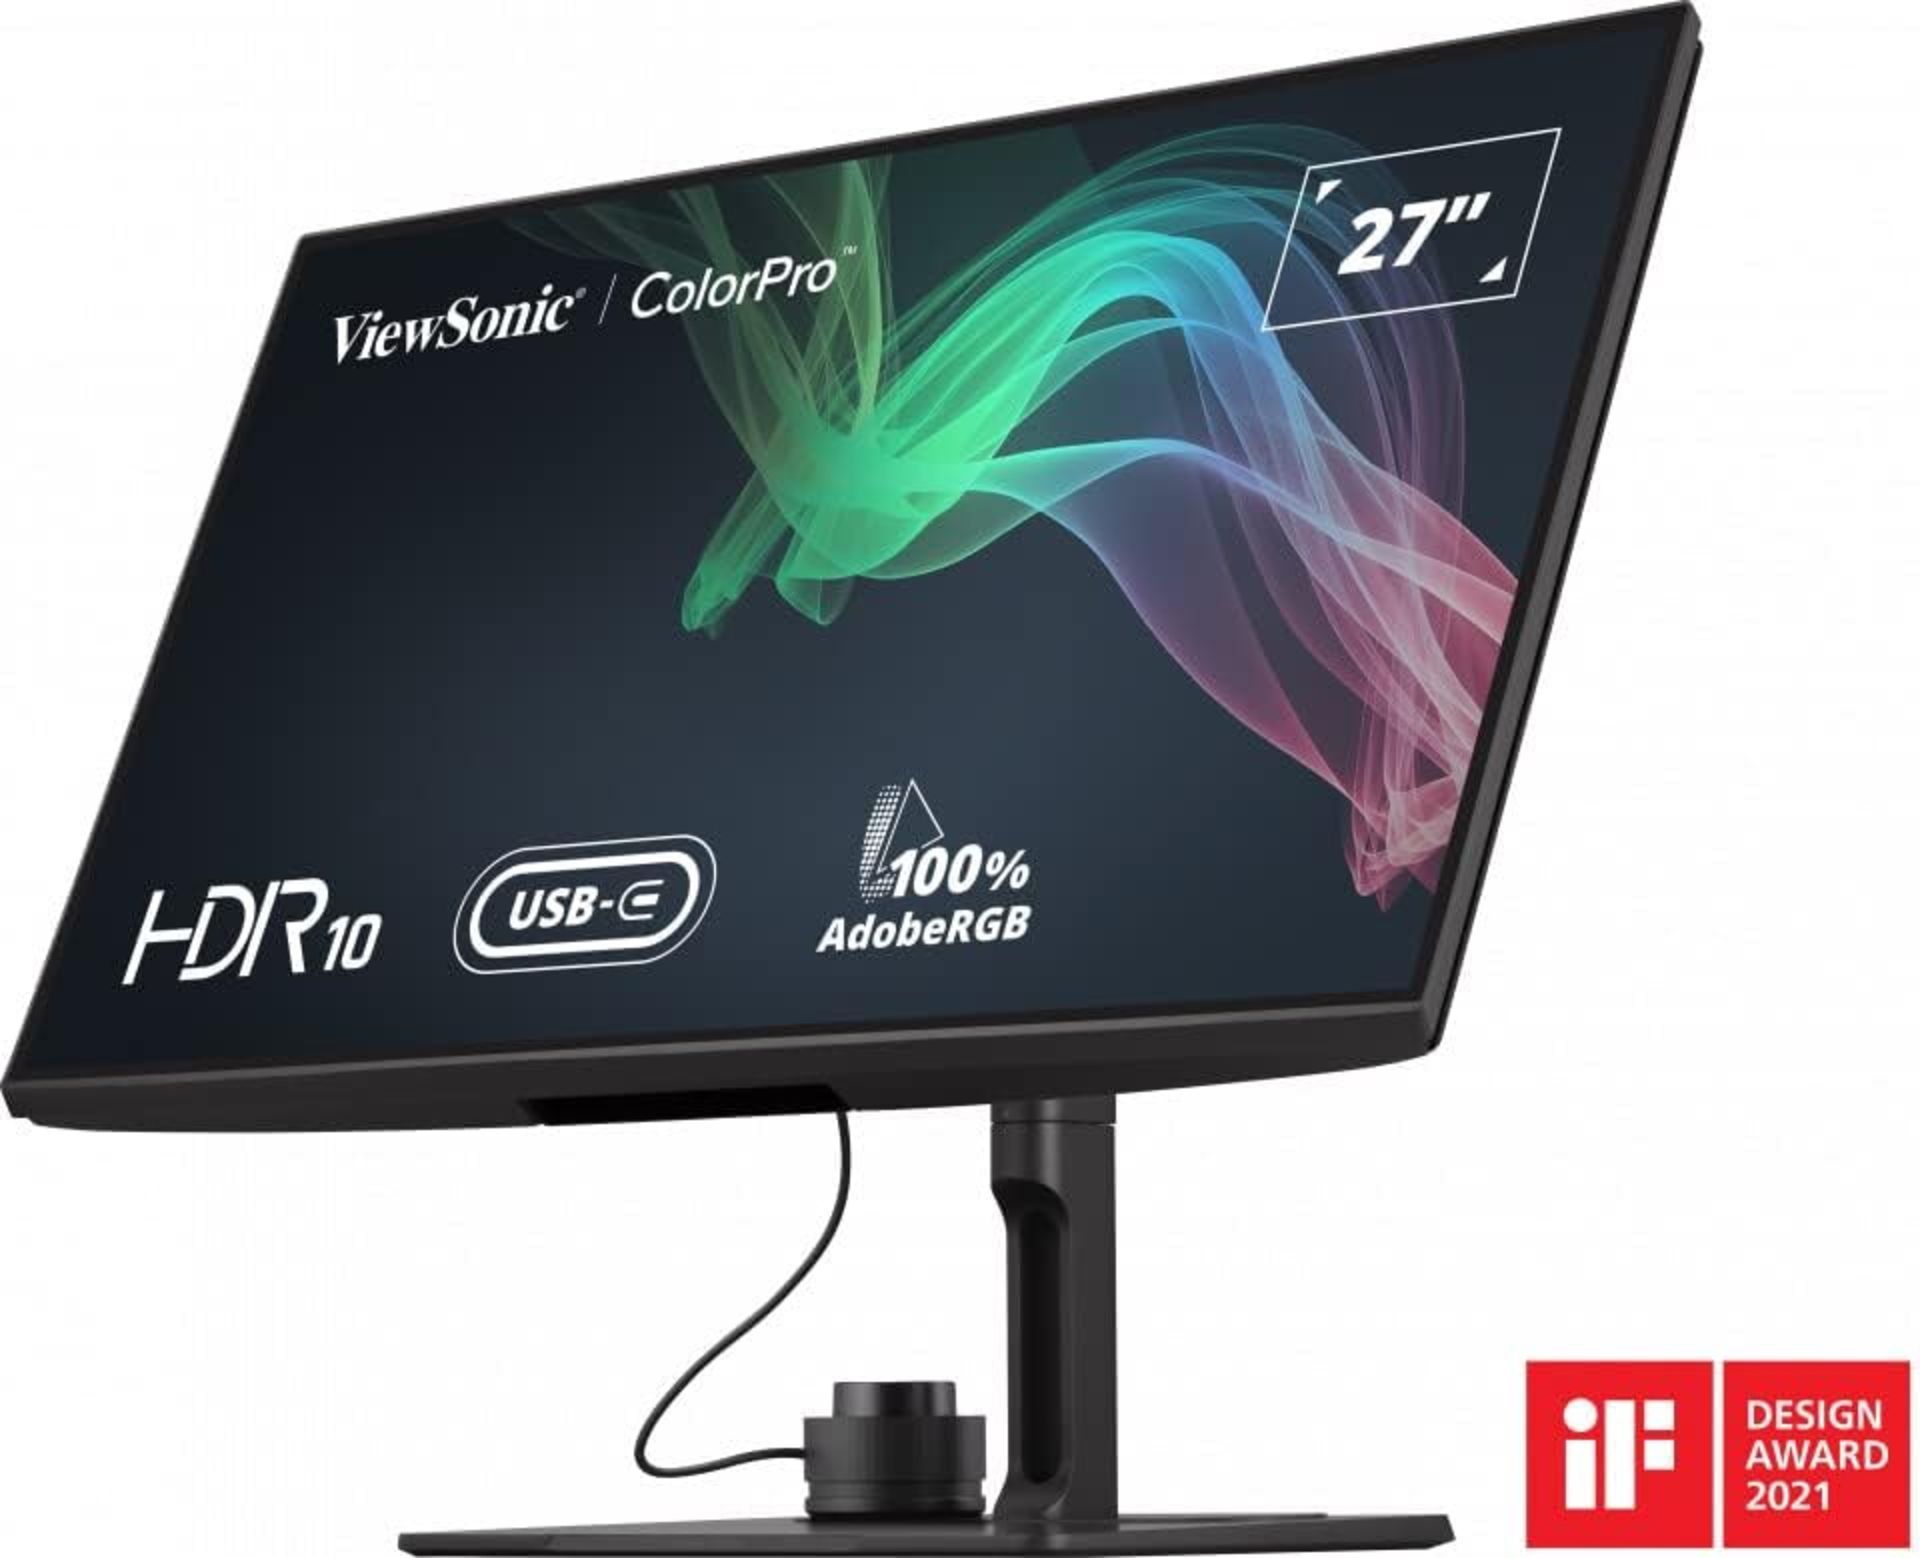 BRAND NEW FACTORY SEALED VIEWSONIC VP2786-4K ColorPro 27-inch IPS 4K UHD Monitor. RRP £1028. (PCK4). - Image 5 of 7